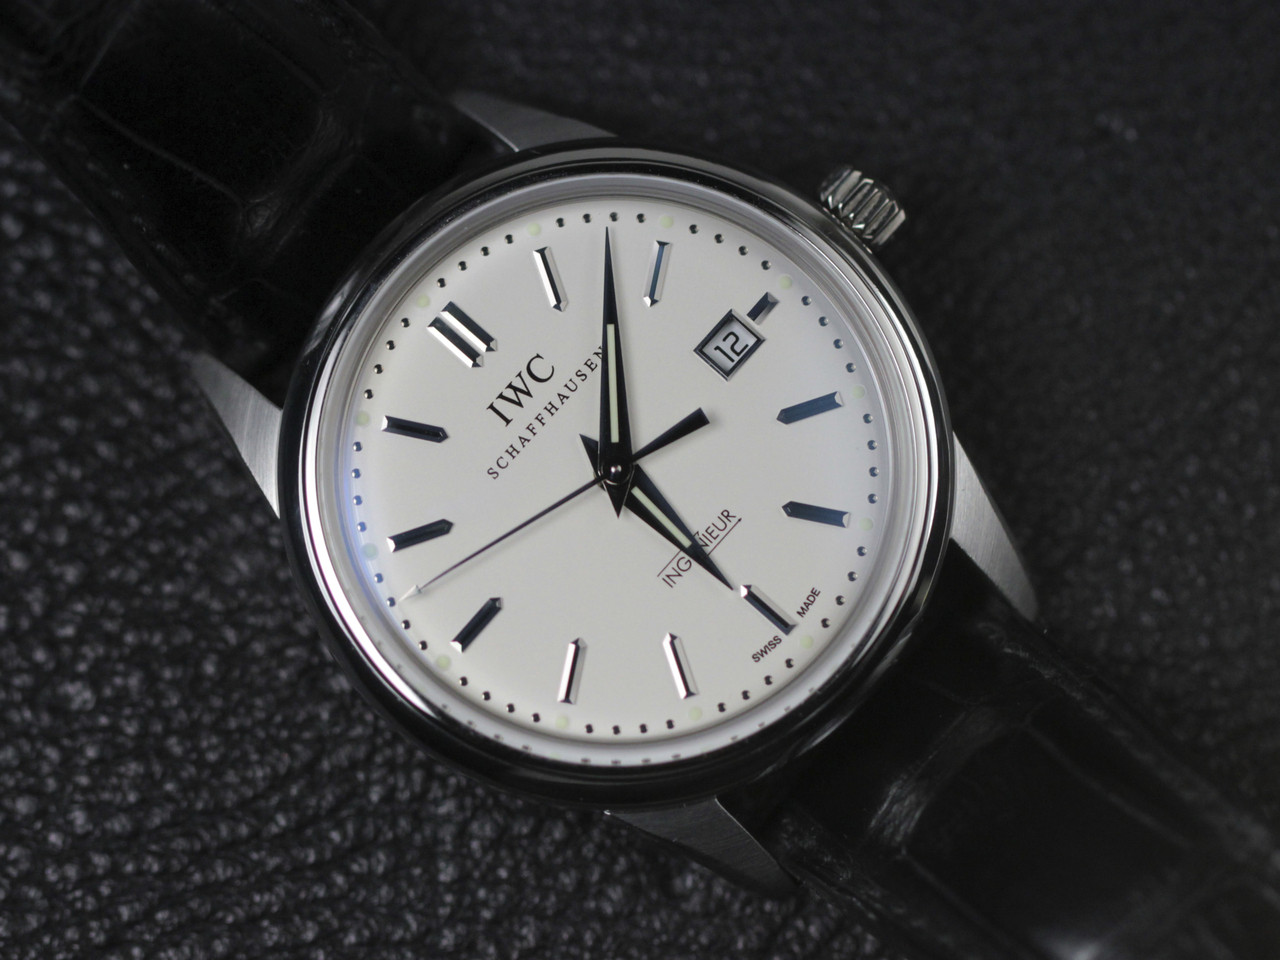 IWC Limited Edition Vintage Ingenieur Auto Watch 3233 from www ...